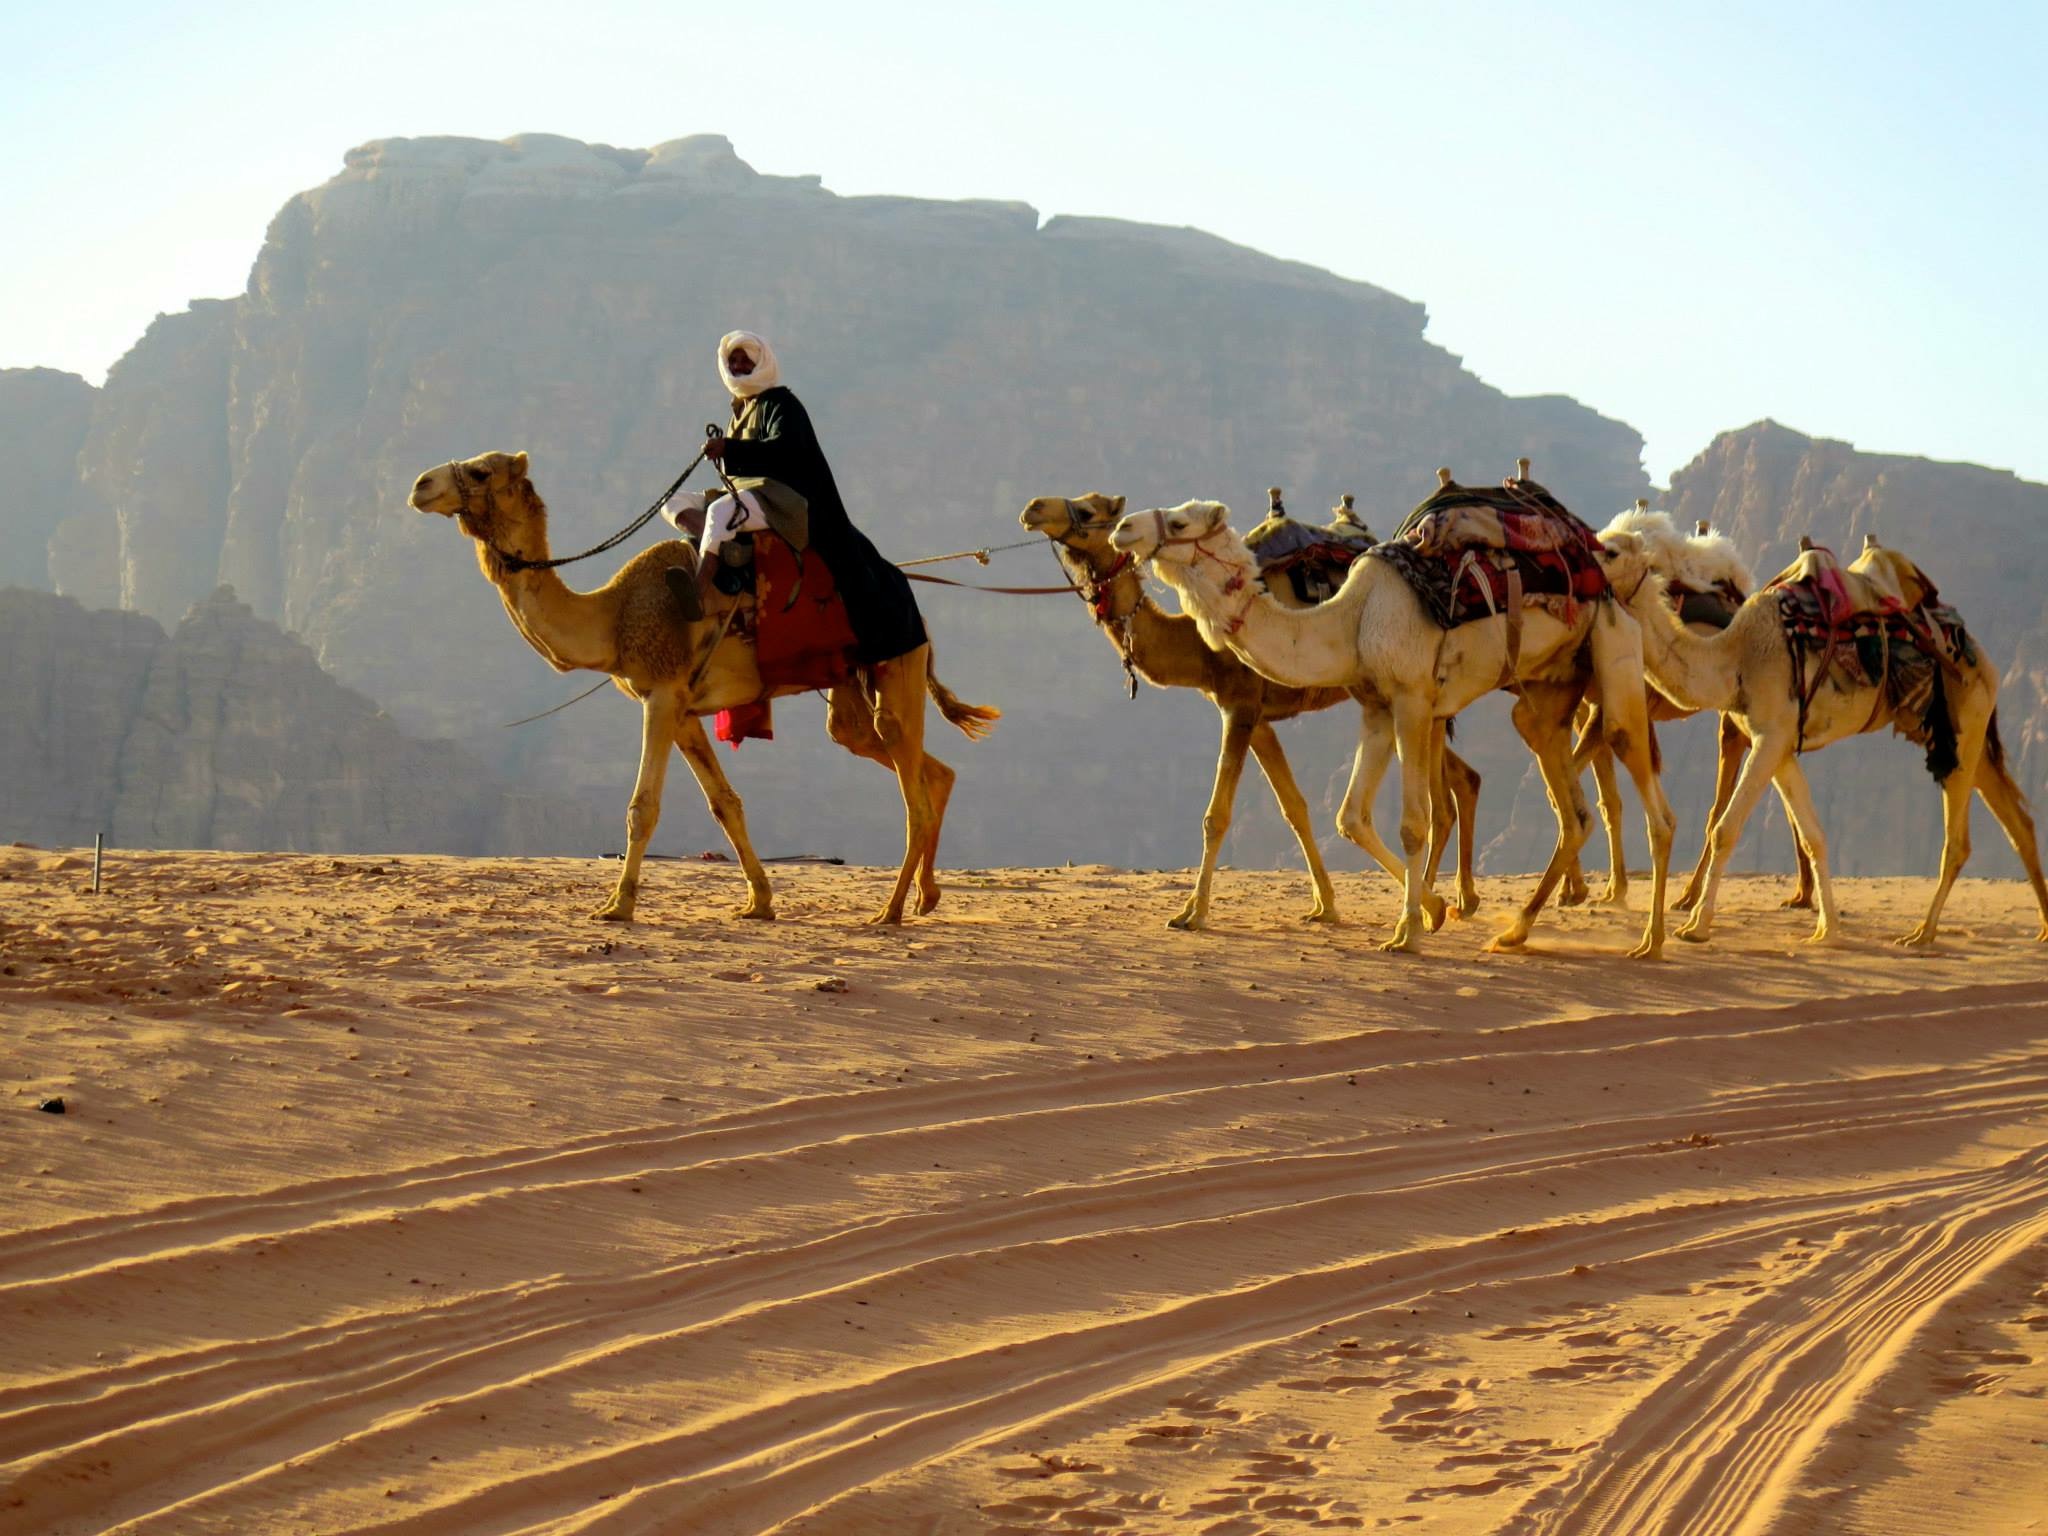 Bedouin with his camels, wandering in the Wadi Rum desert. Photo by Victoria Thorsen.